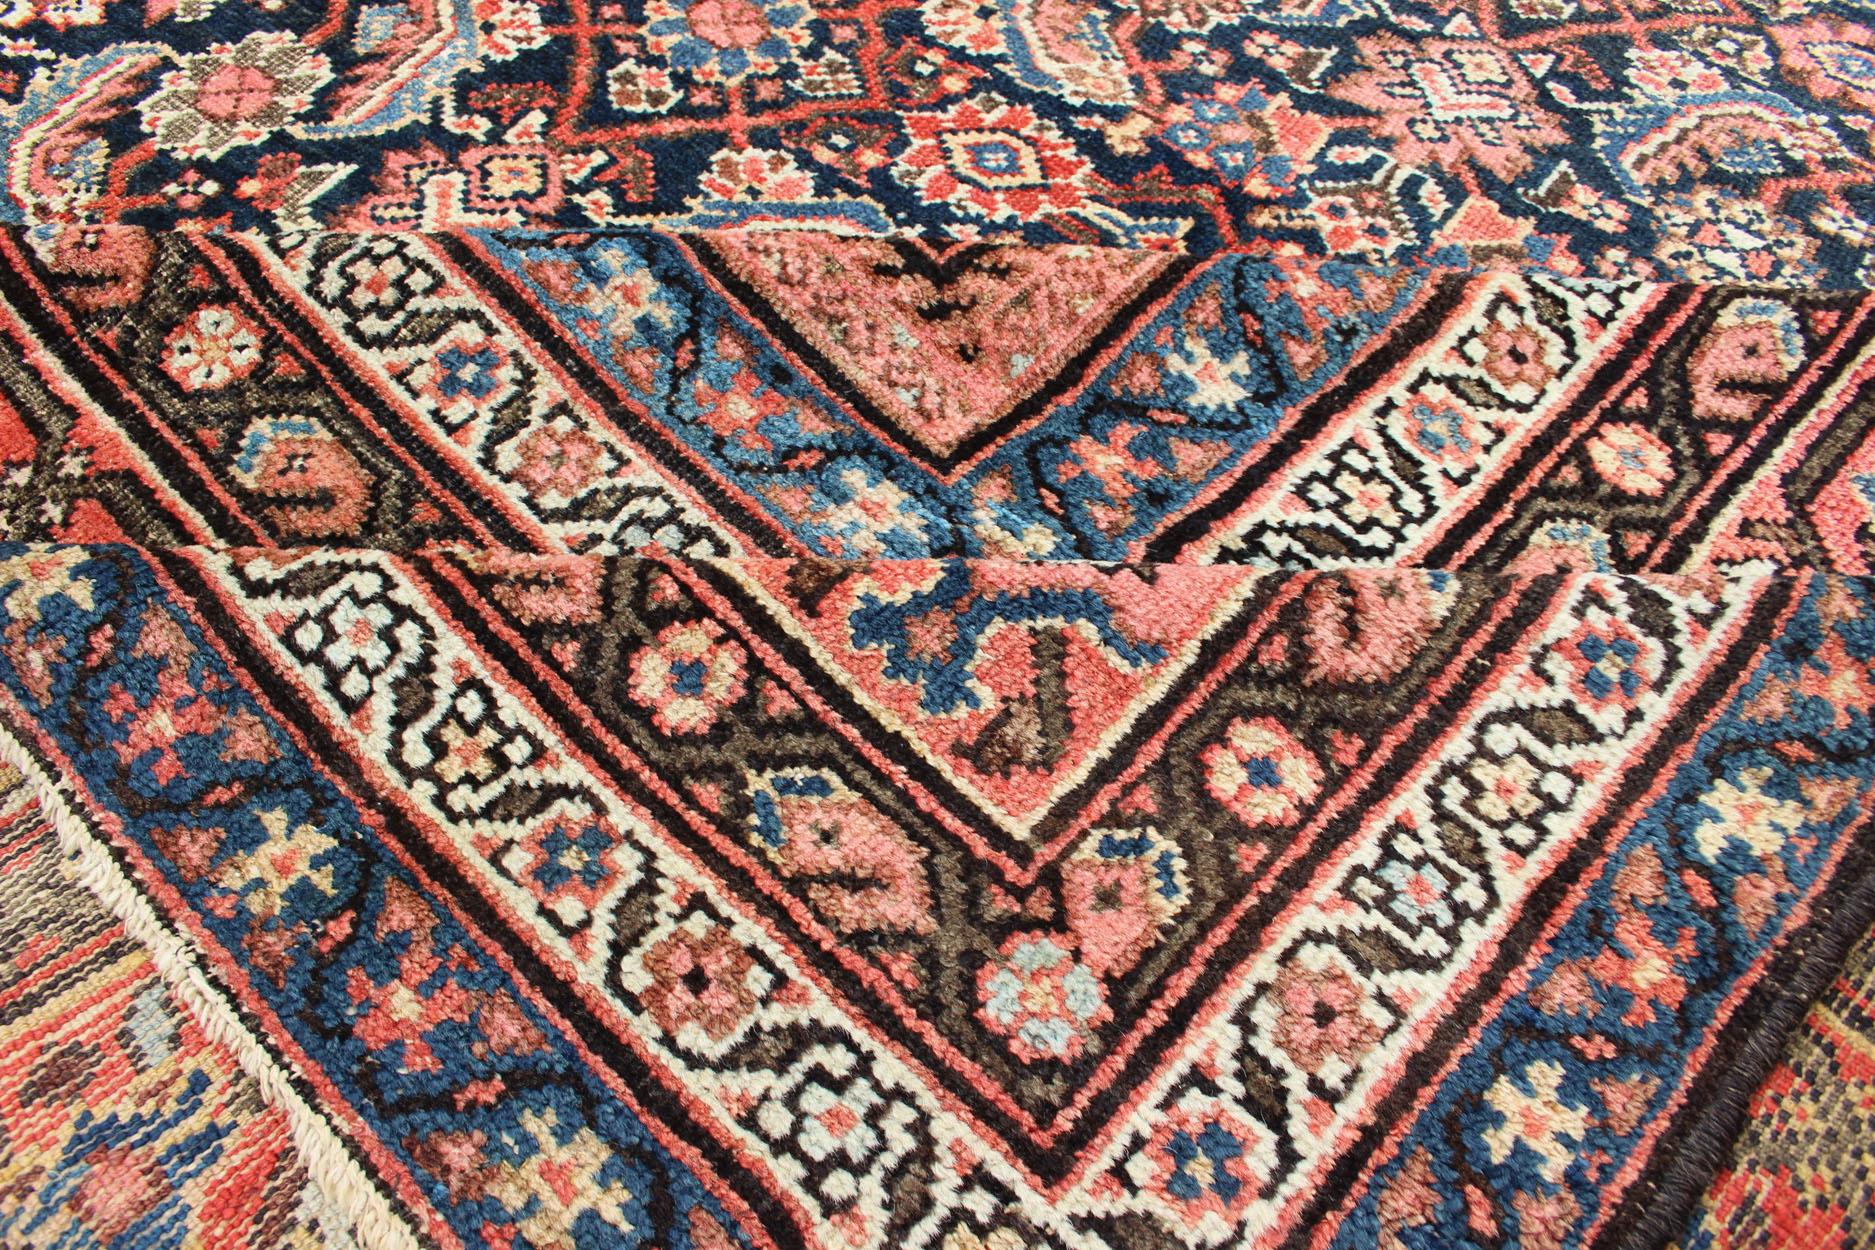 19th Century Very Long Persian Sultanabad Rug with Herati Design in Dark Blue and Red